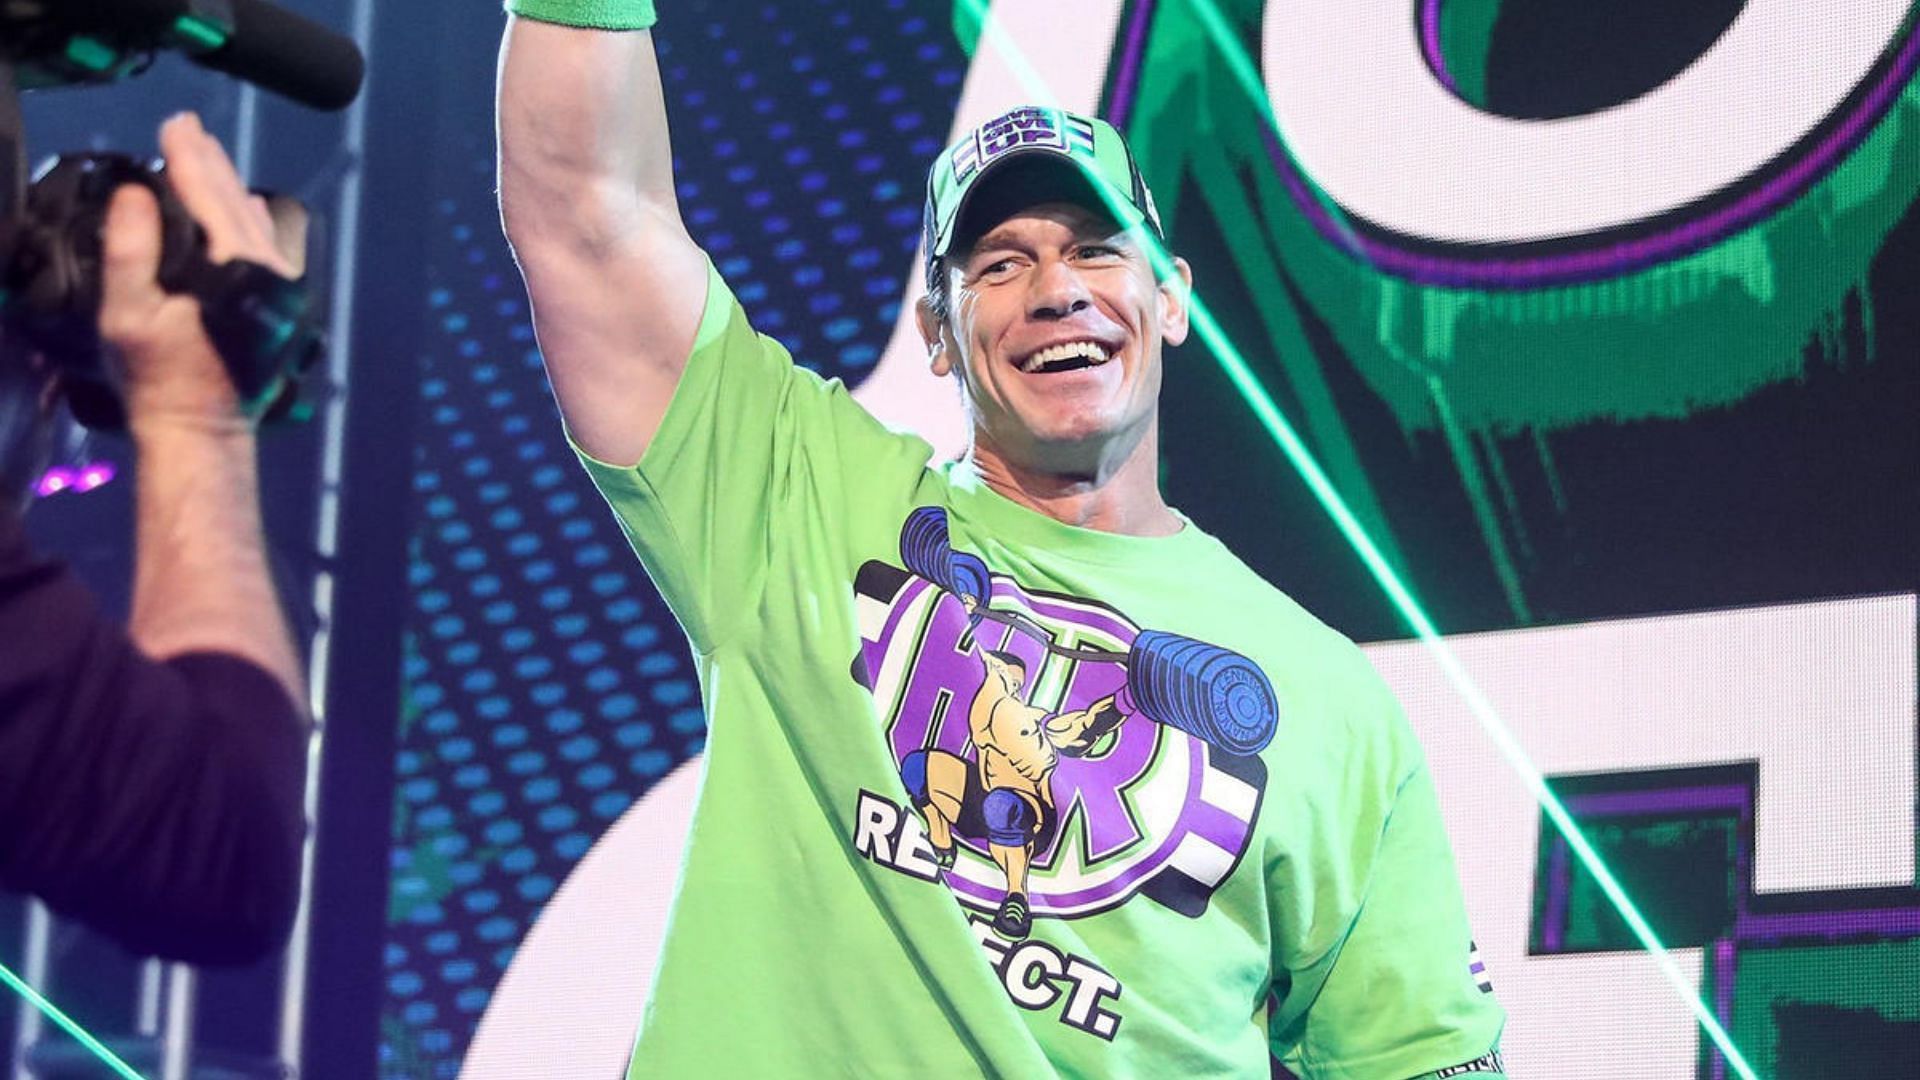 John Cena may be in line for another WrestleMania appearance